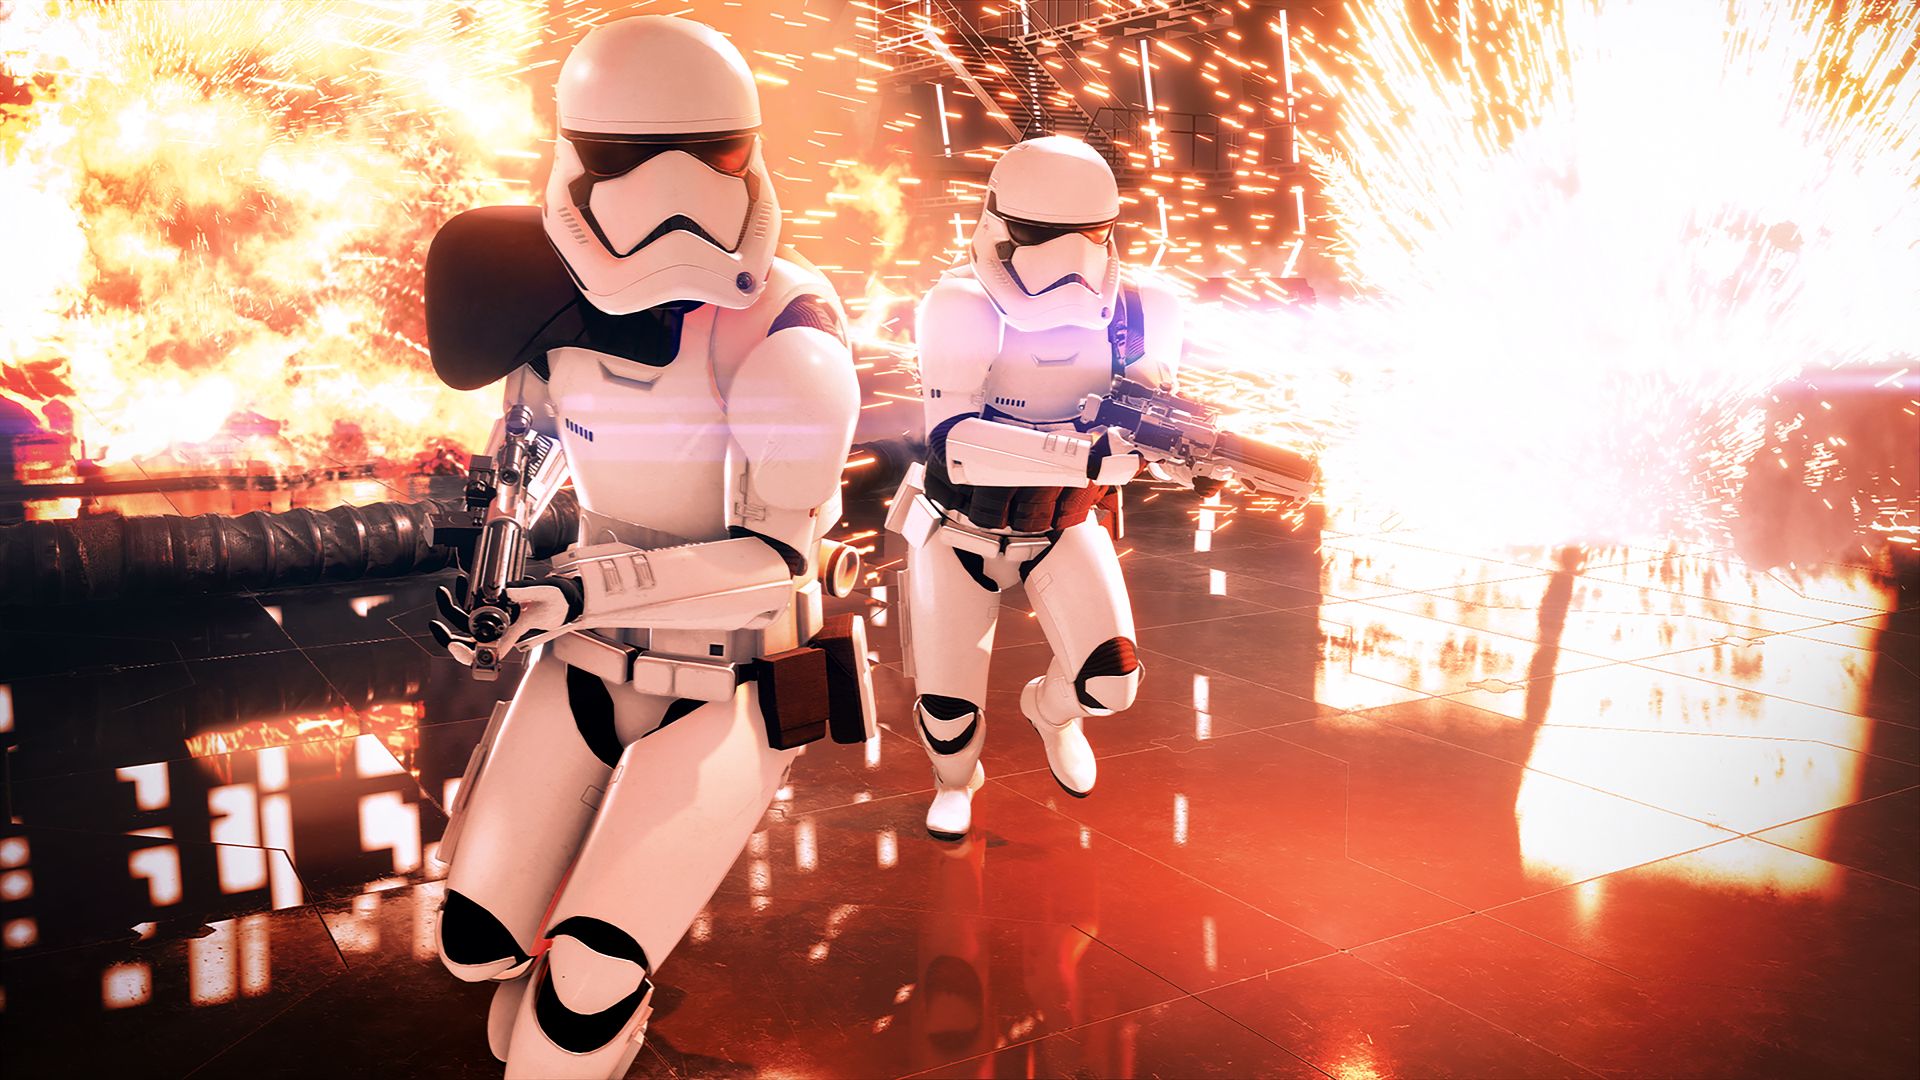 Here Are Some of the Easiest Ways to Earn Credits in Star Wars